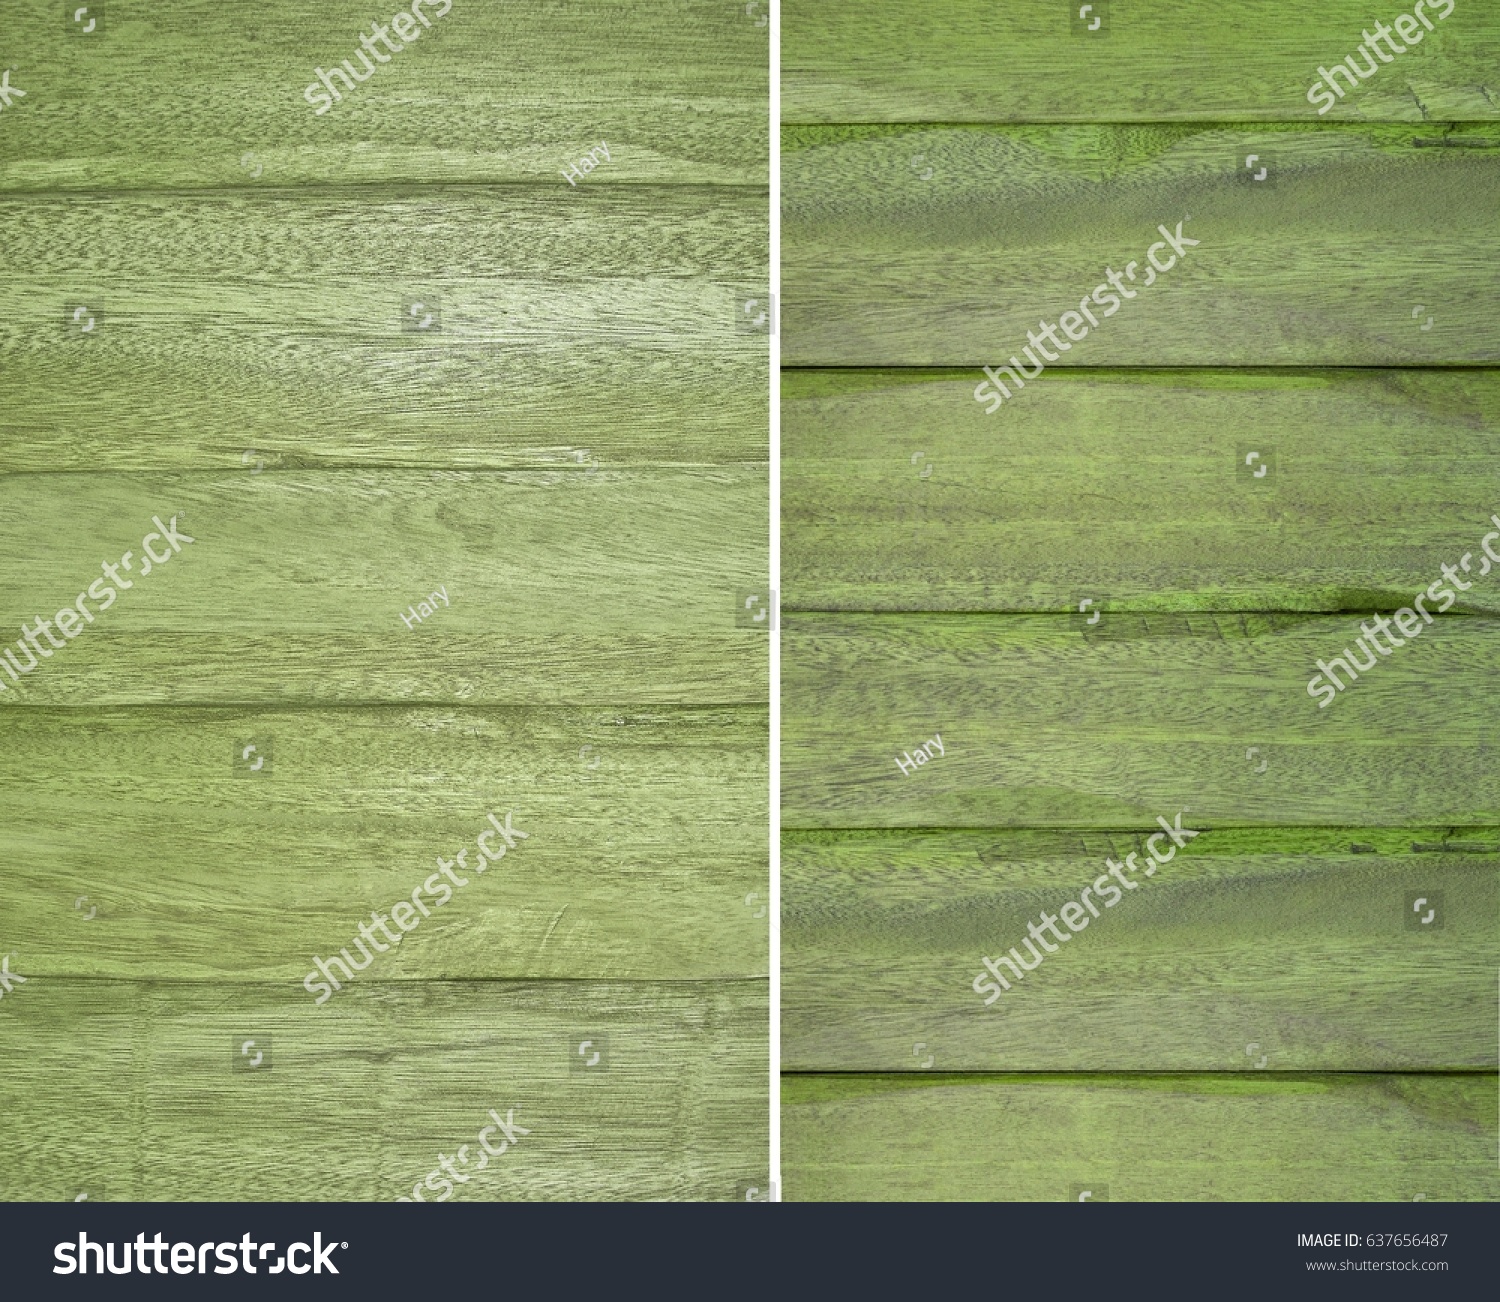 Wood Texture Lining Boards Wall Set Stock Photo 637656487 - Shutterstock